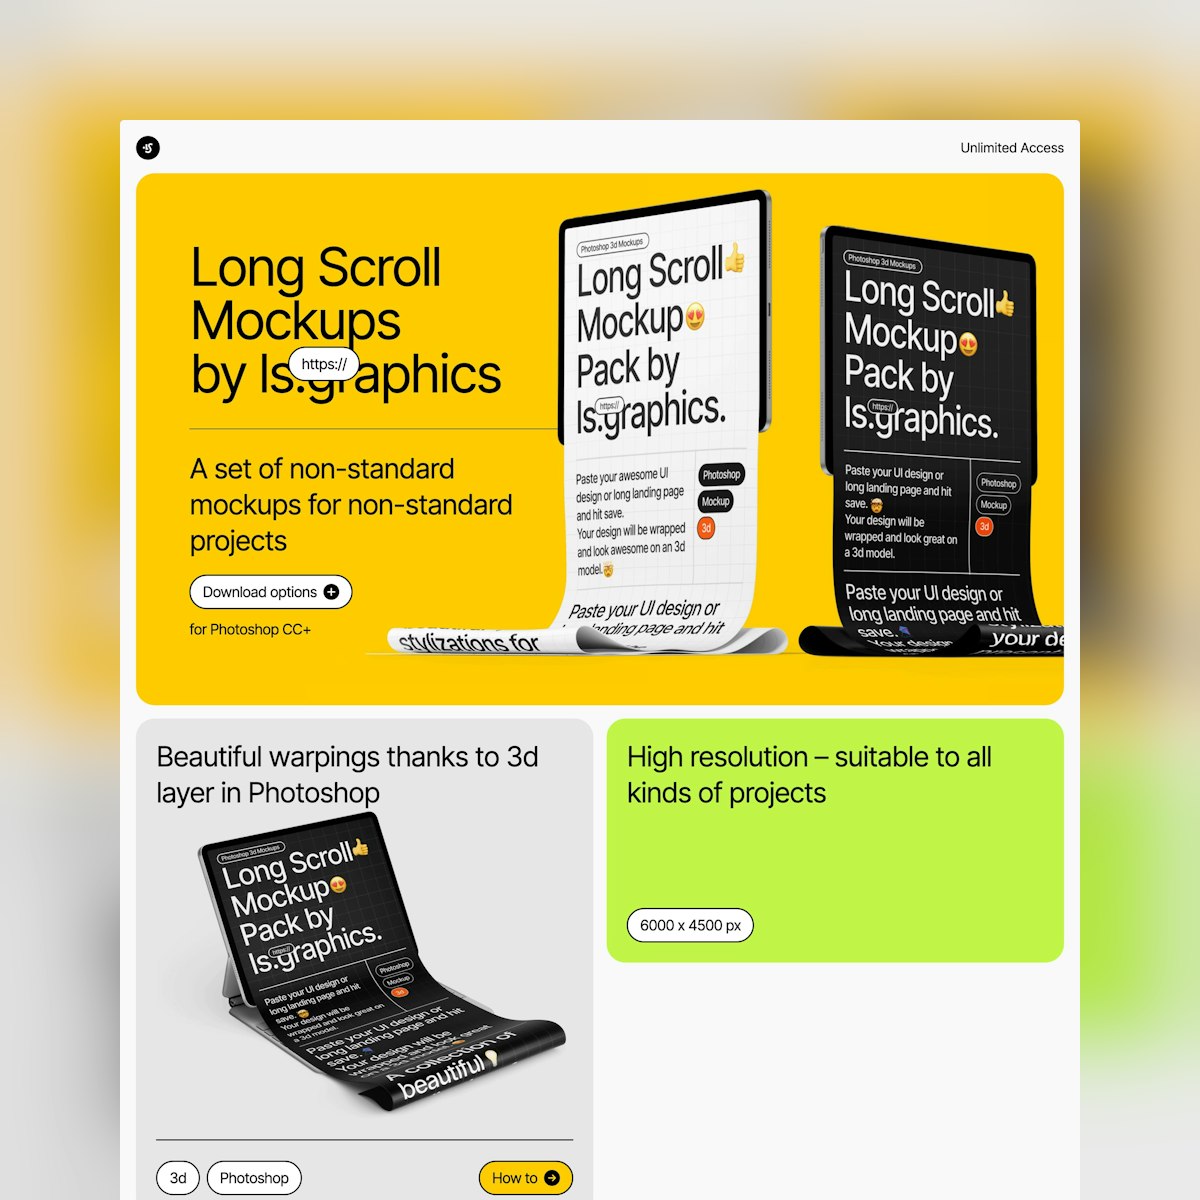 Product Page screen design idea #326: Website Inspiration: Long Scroll Mockups